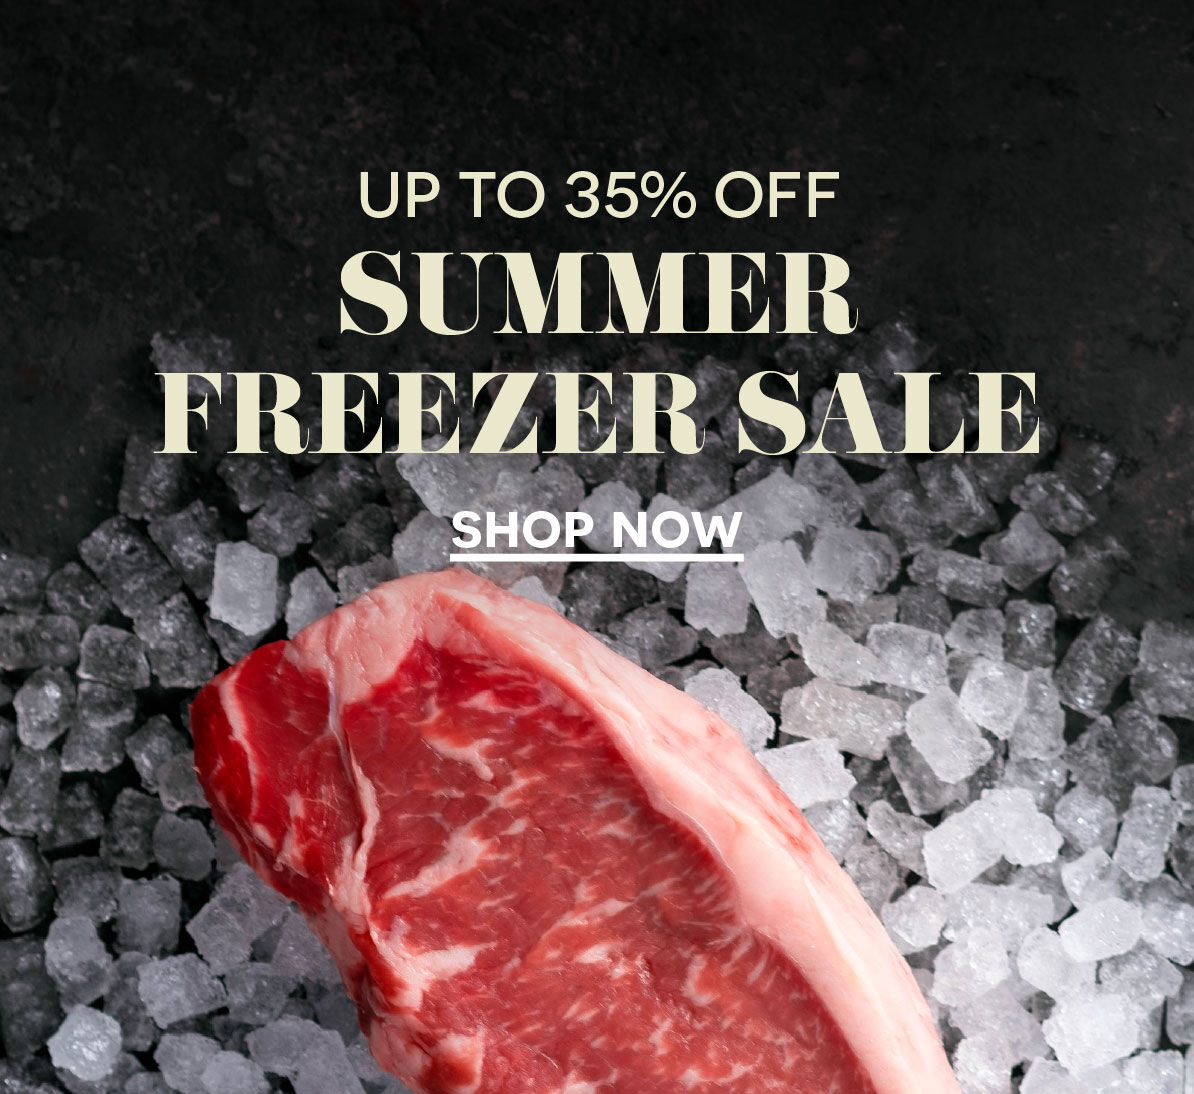 Freezer Sale: Up to 35% OFF Select Items